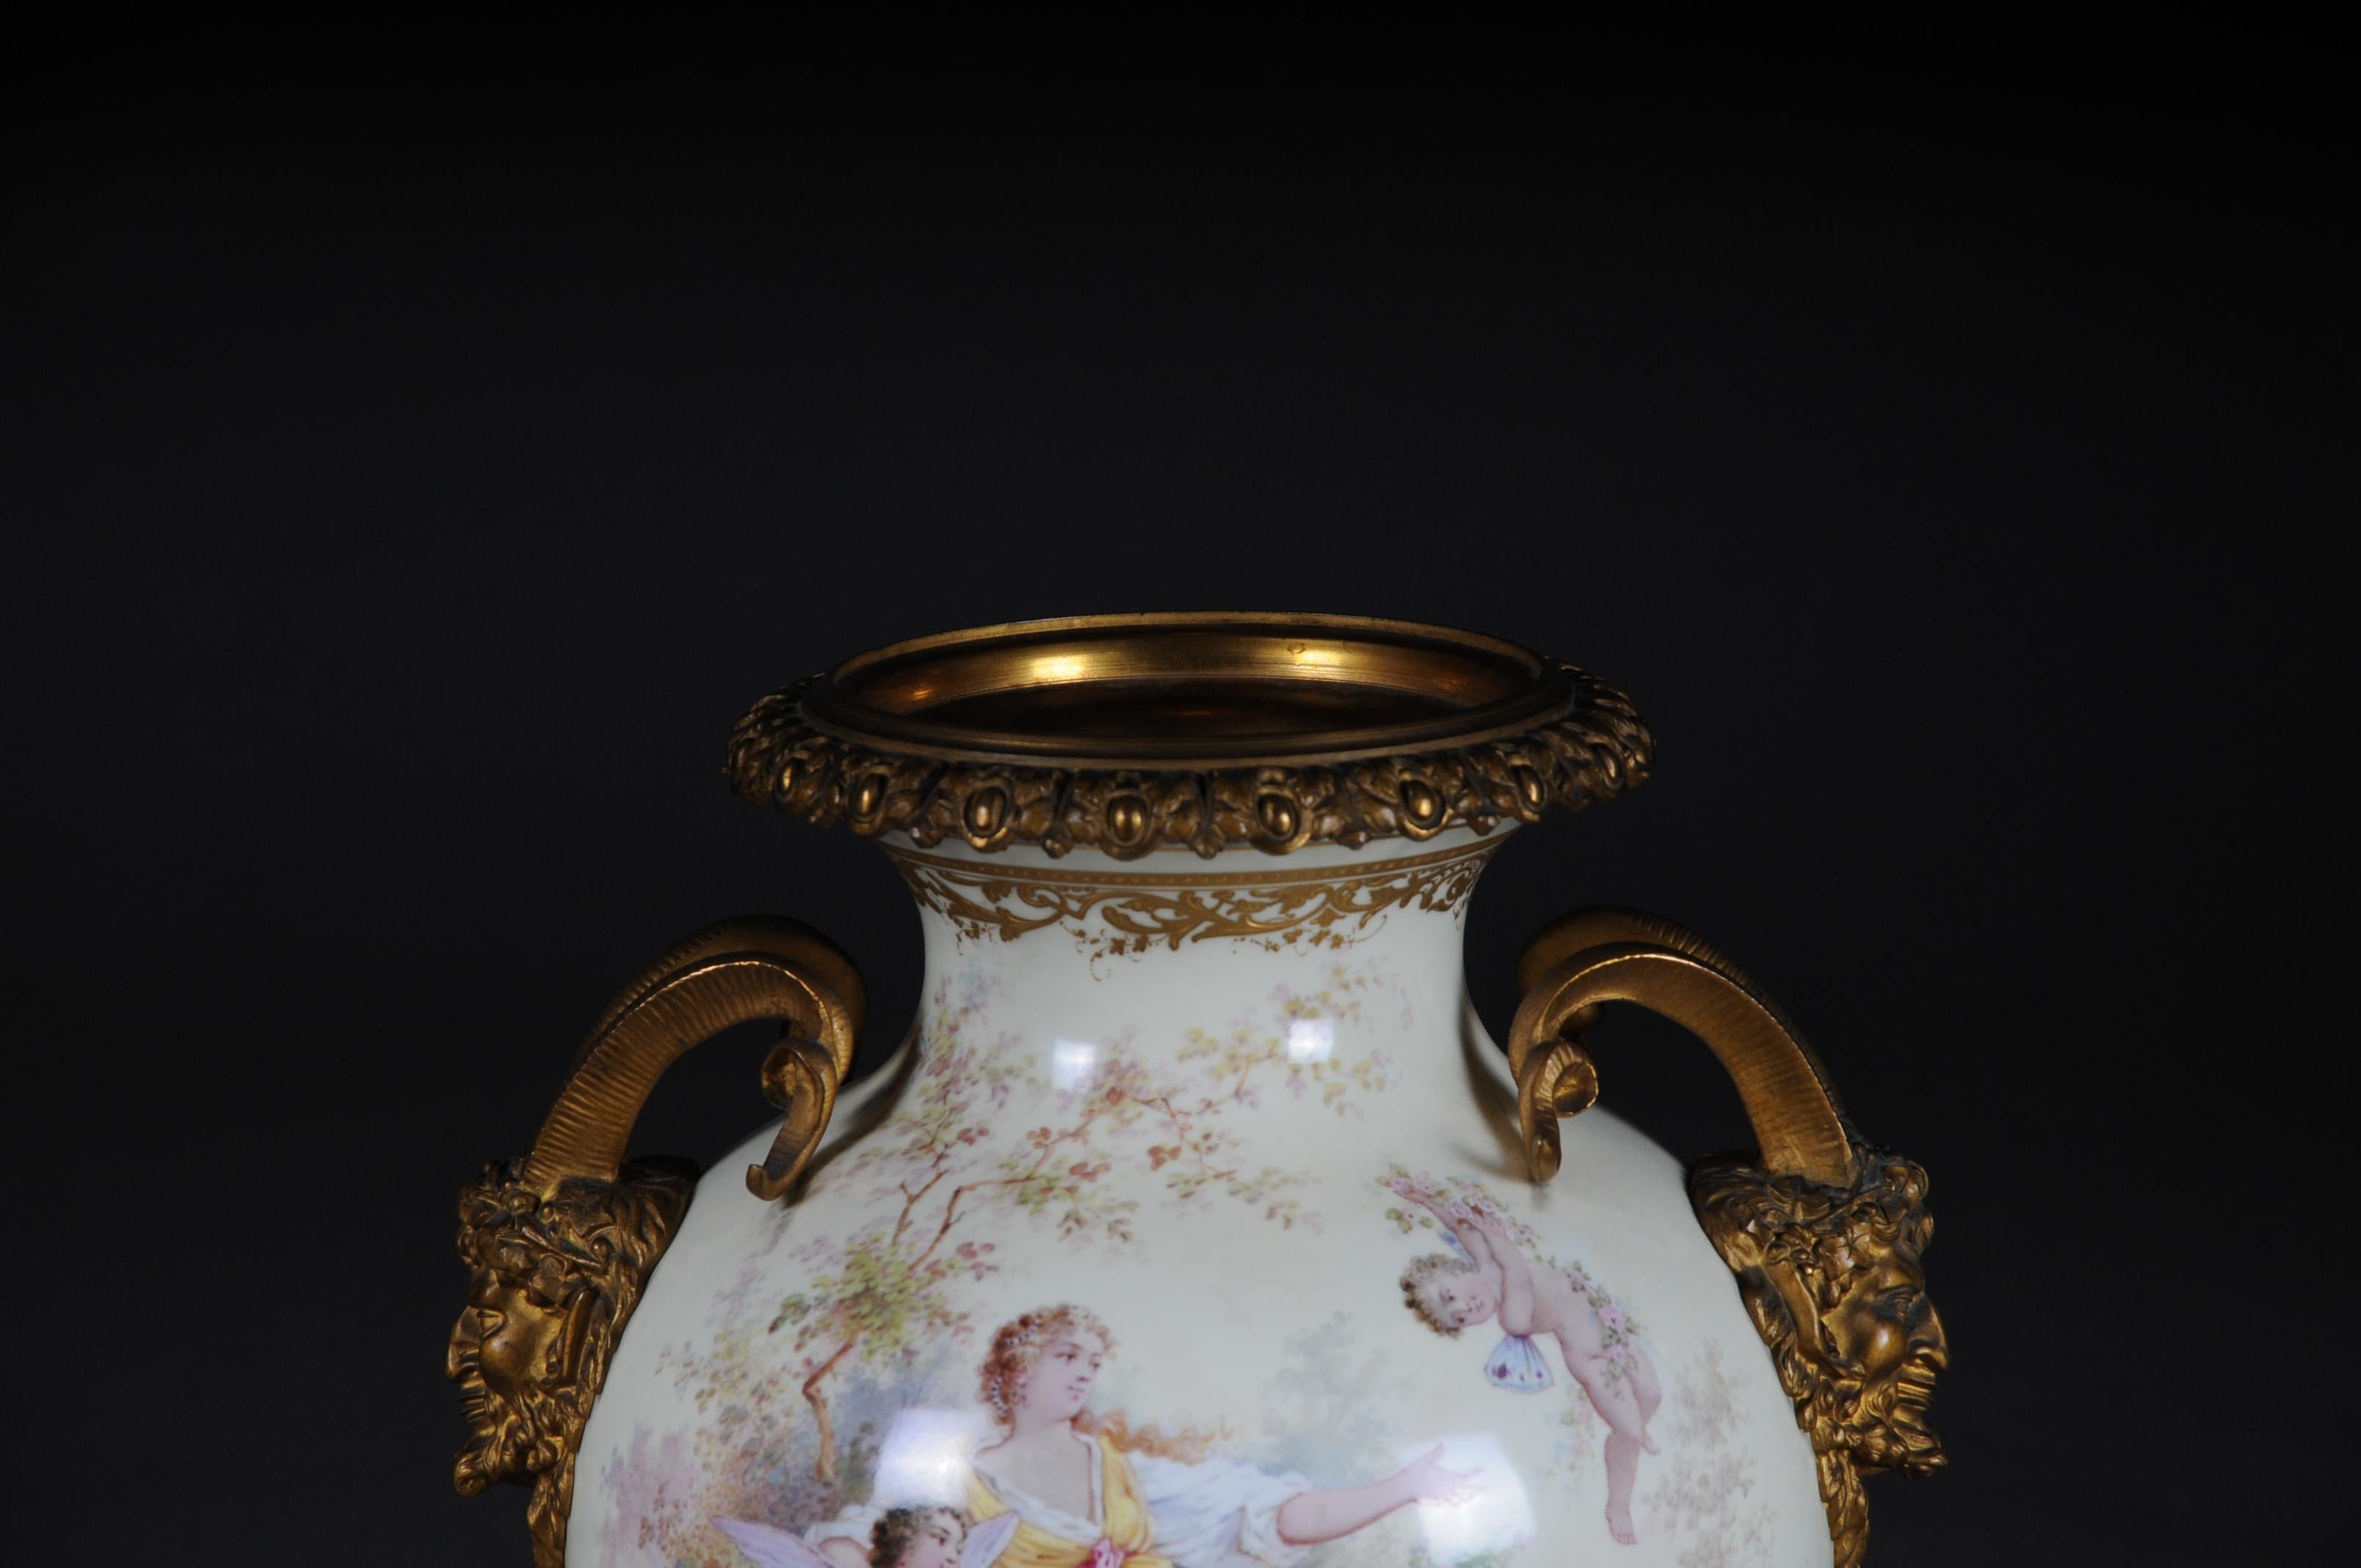 19th century monumental Sèvres pomp vase with bronze mounting

France, circa 1900
Eggshell colors glazed with delicate coloring: Venus and Amor Boy, accompanied by Cupids. Signed: G. Poitevin. Cupid with dove on the back. Relief gold friezes.